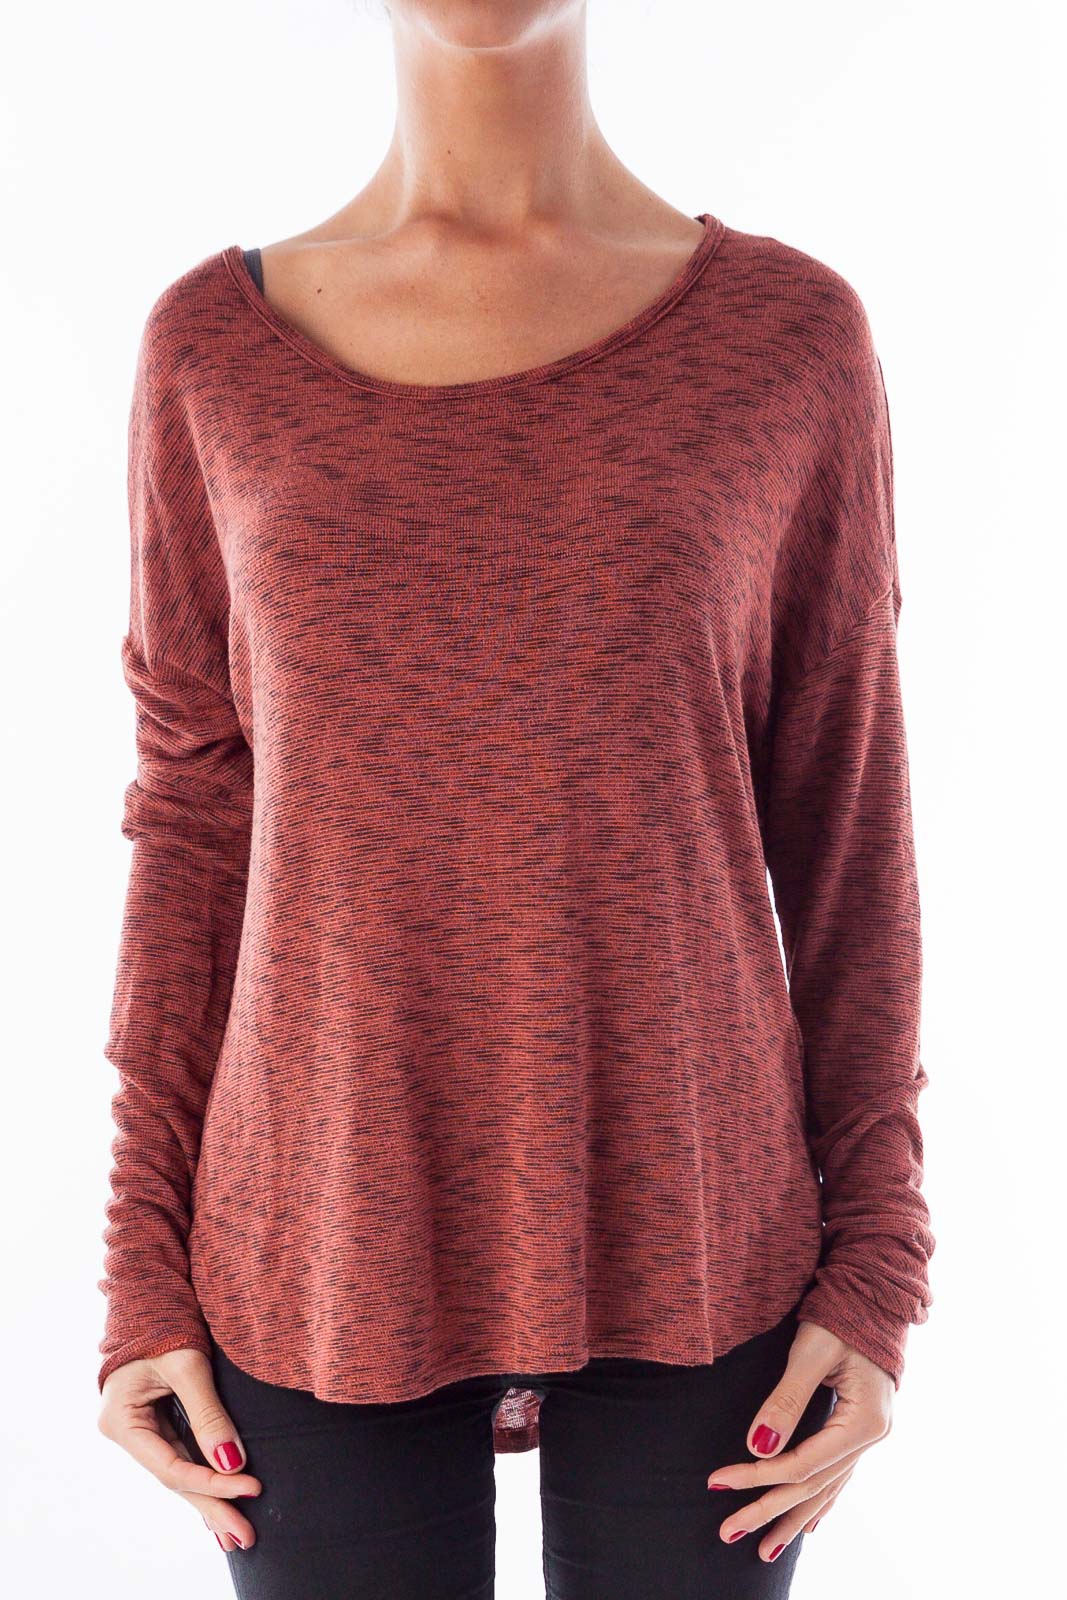 Orange and Black Knit Top Front